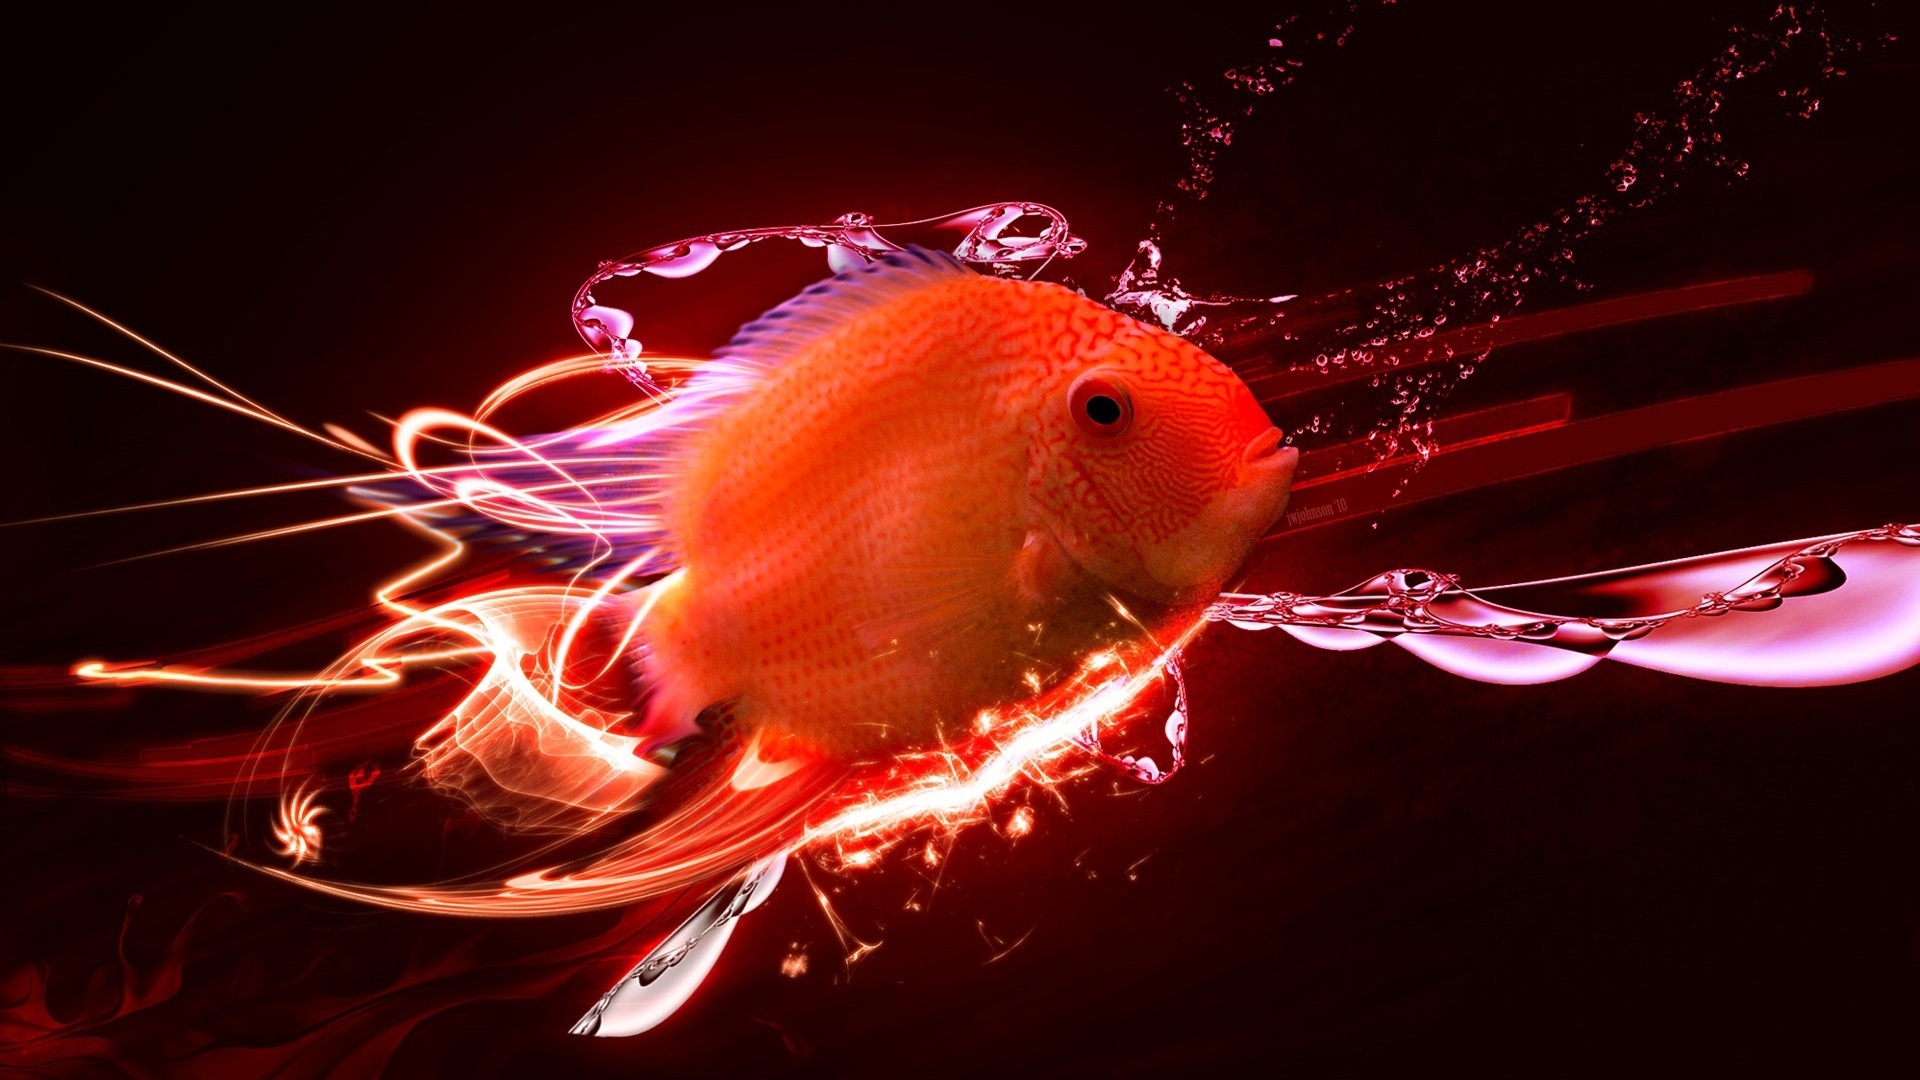 Red fish for 1920 x 1080 HDTV 1080p resolution